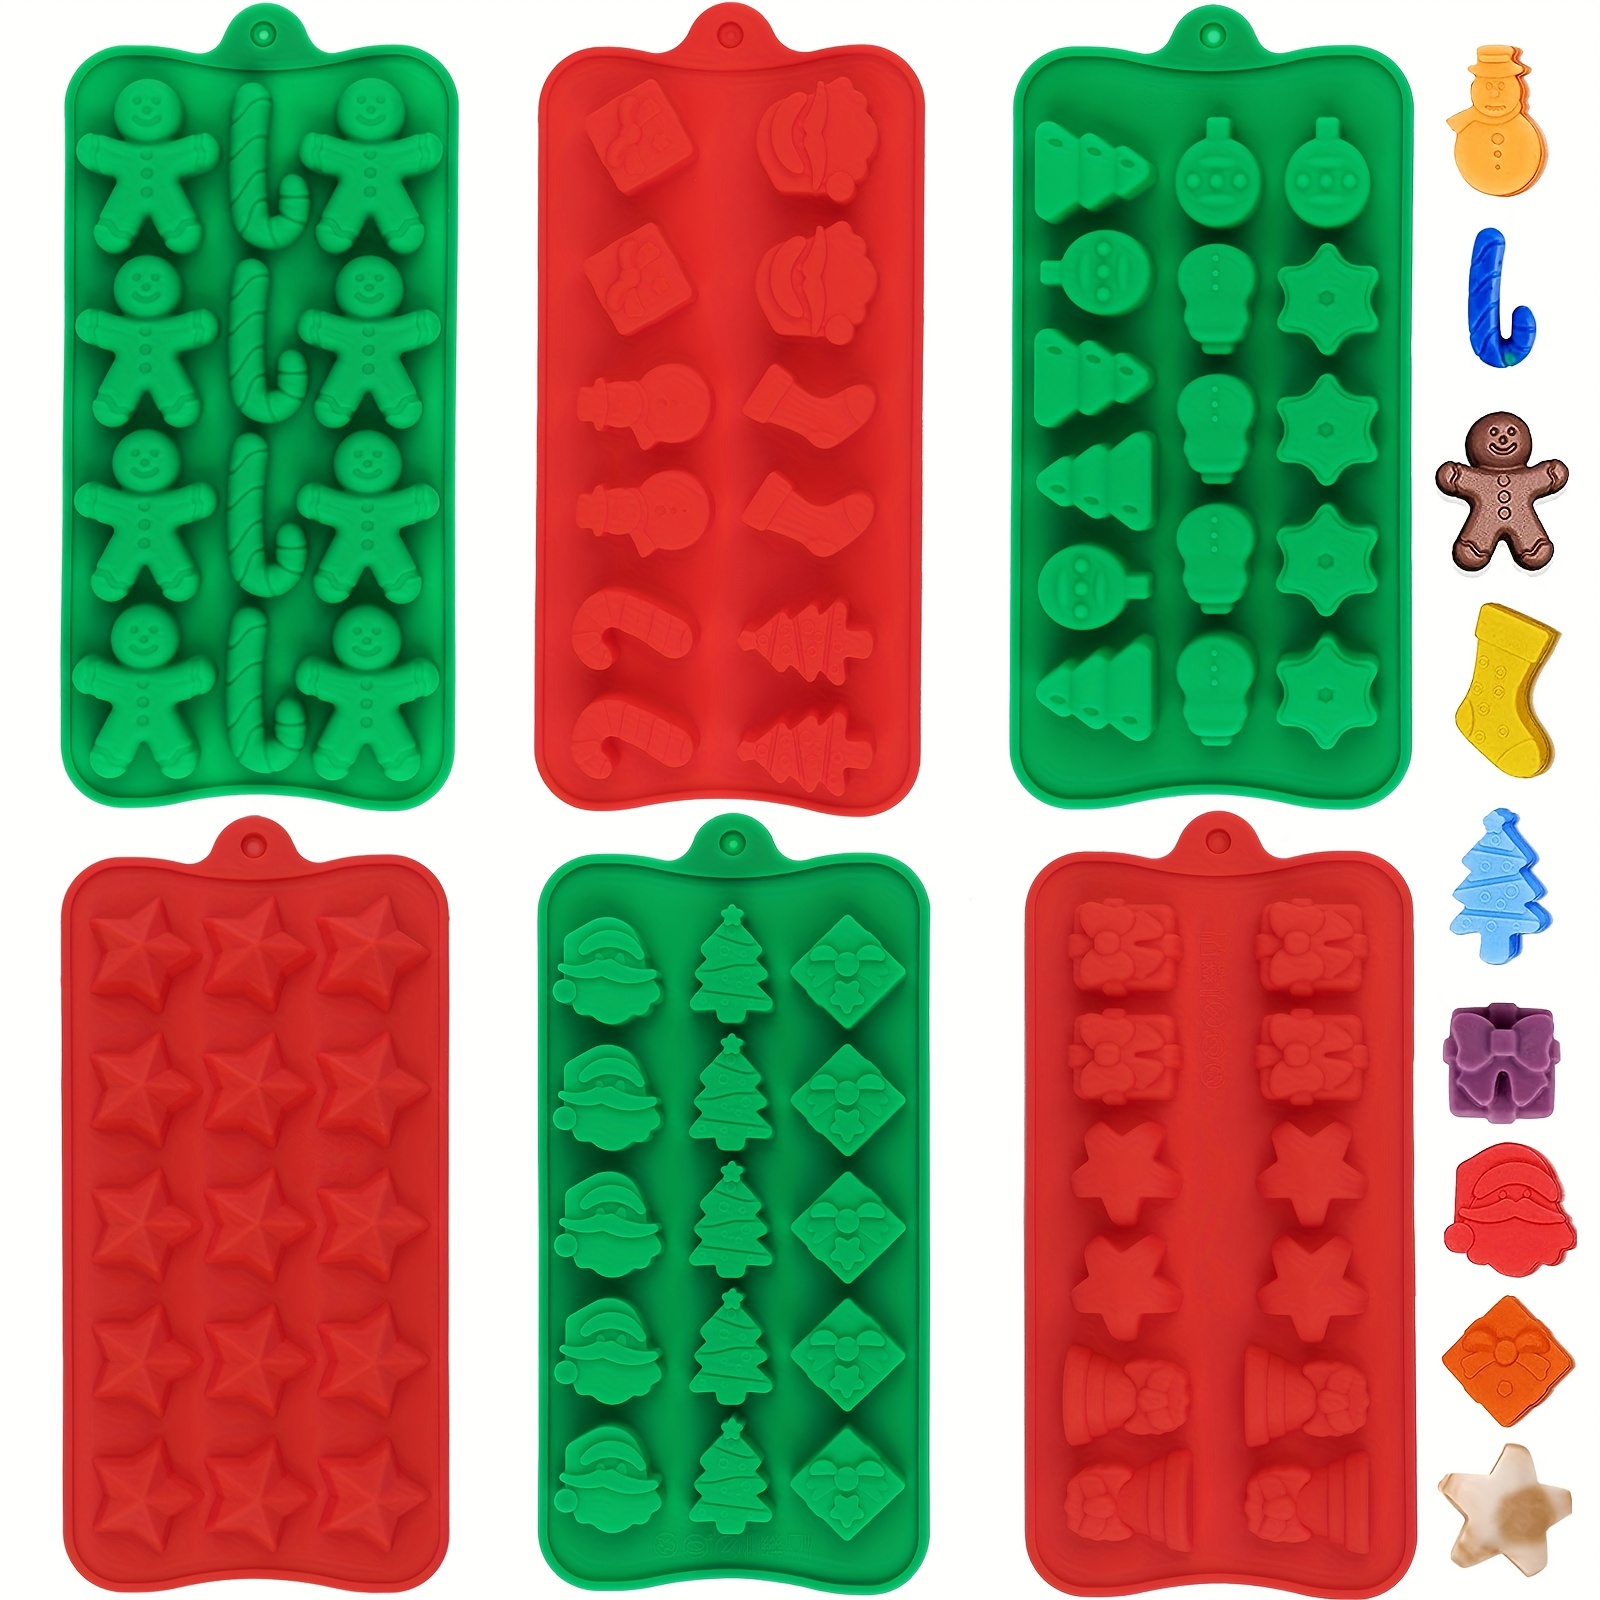 Silicone Candy Molds + 5 Recipes eBook – 6 Pack – Smart Molds